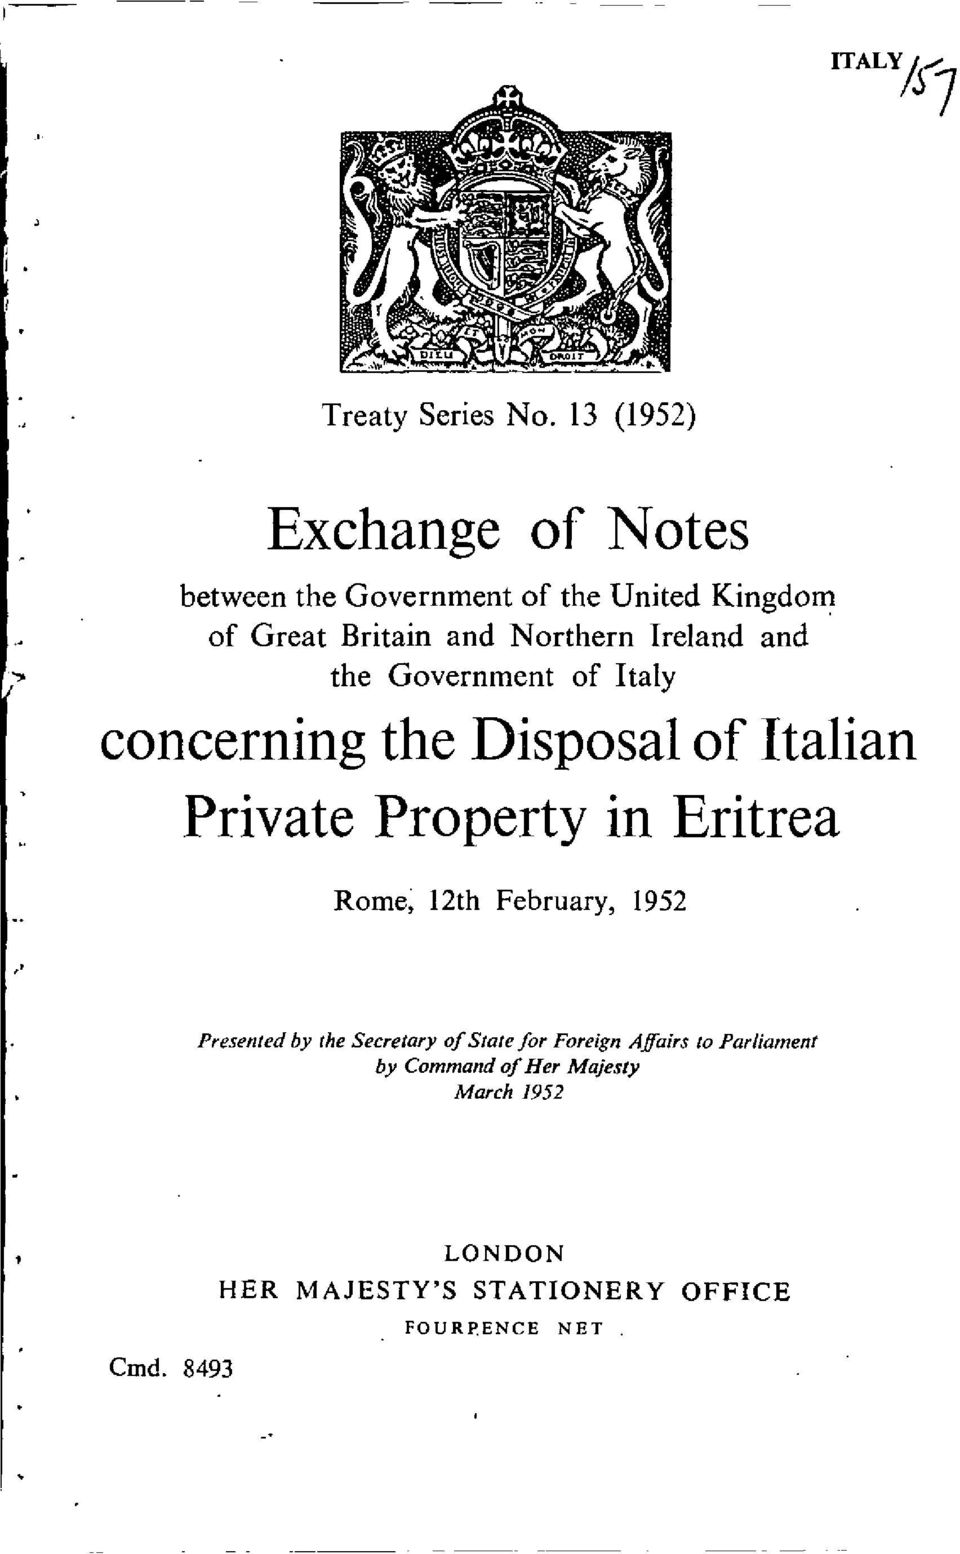 Ireland and the Government of Italy concerning the Disposal of Italian Private Property in Eritrea Rome,